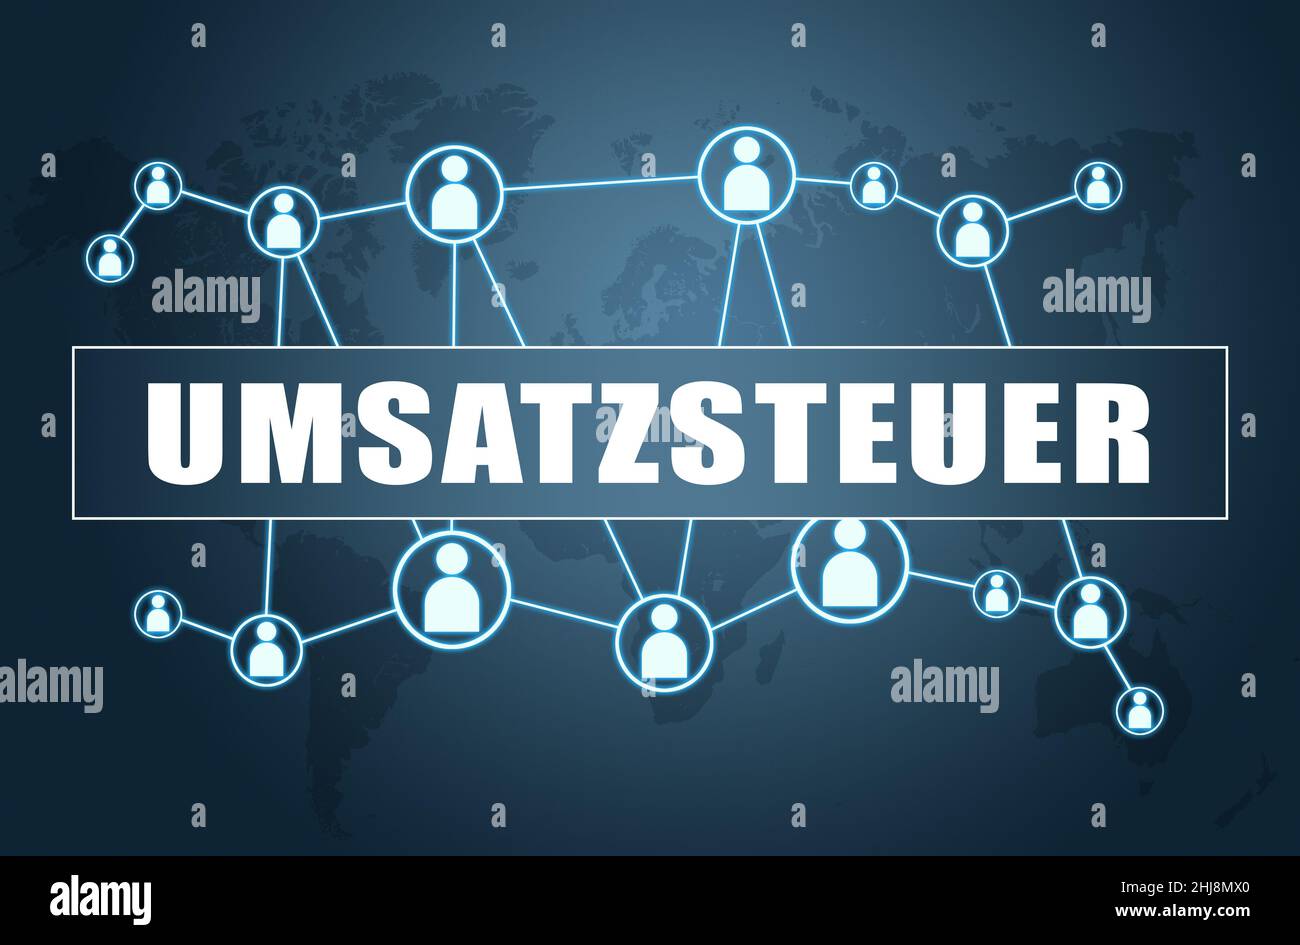 Umsatzsteuer - german word for sales tax or VAT - text concept on blue background with world map and social icons. Stock Photo